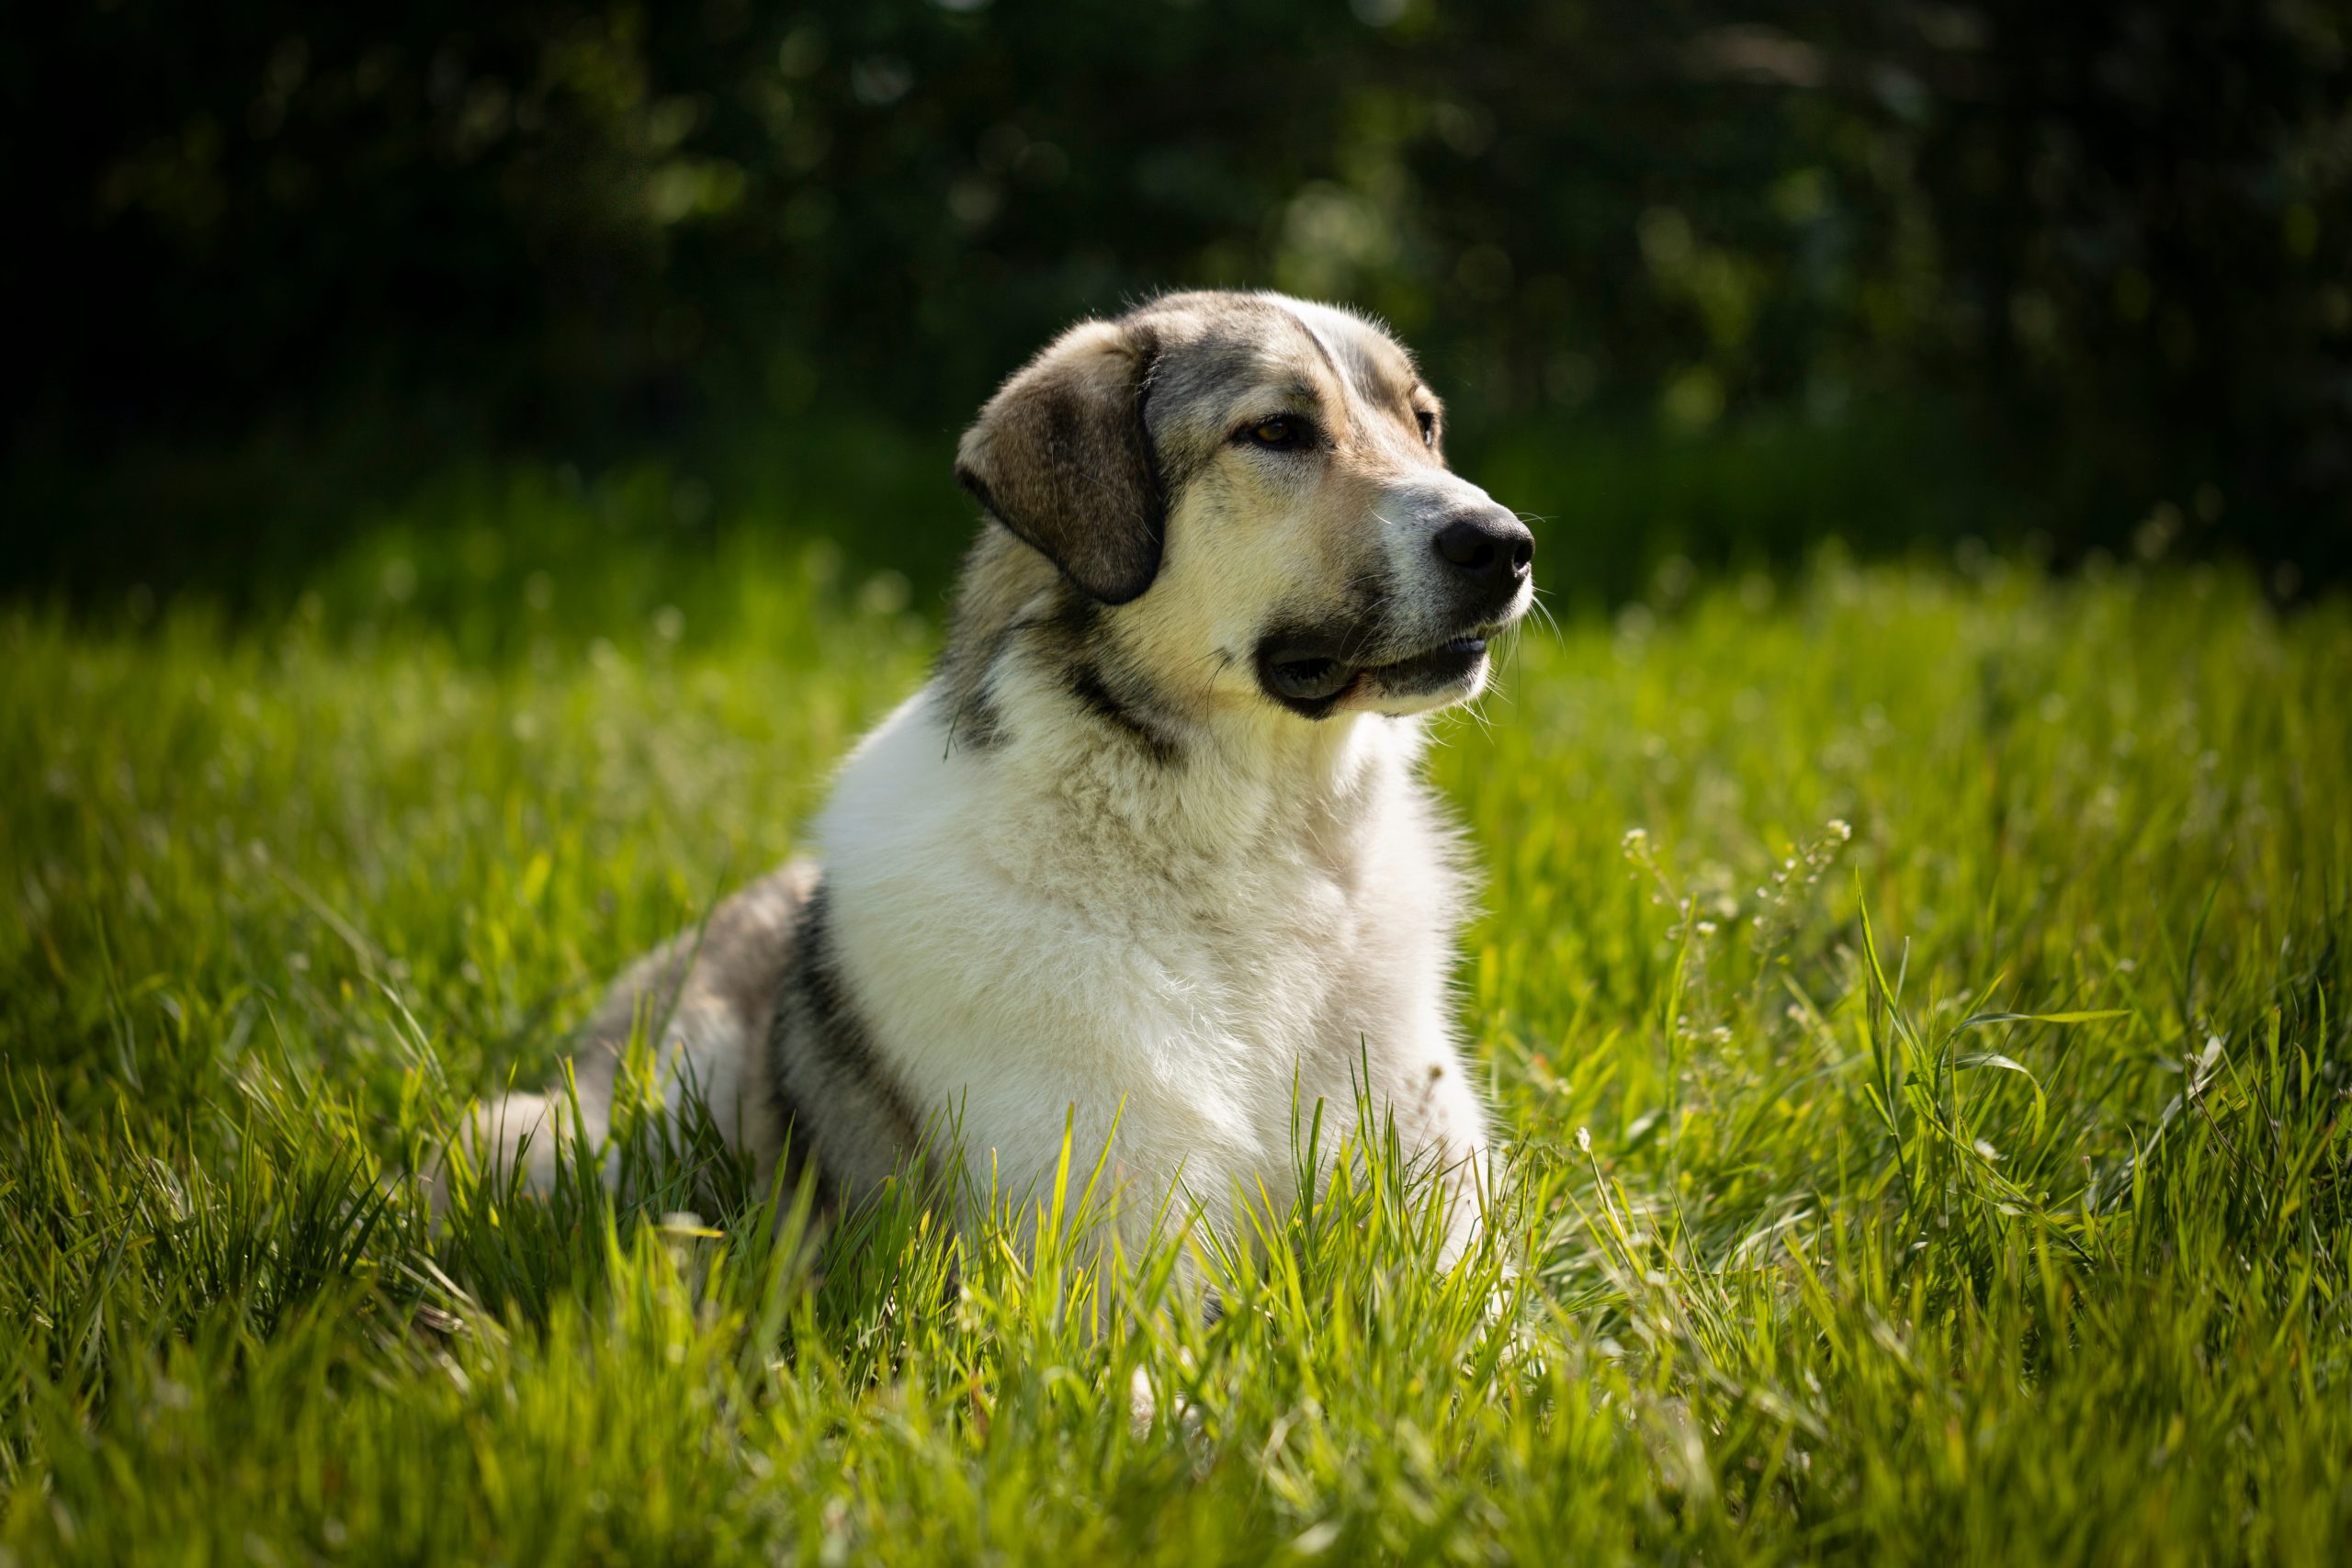 Male & Female Anatolian Shepherd Weights & Heights by Age